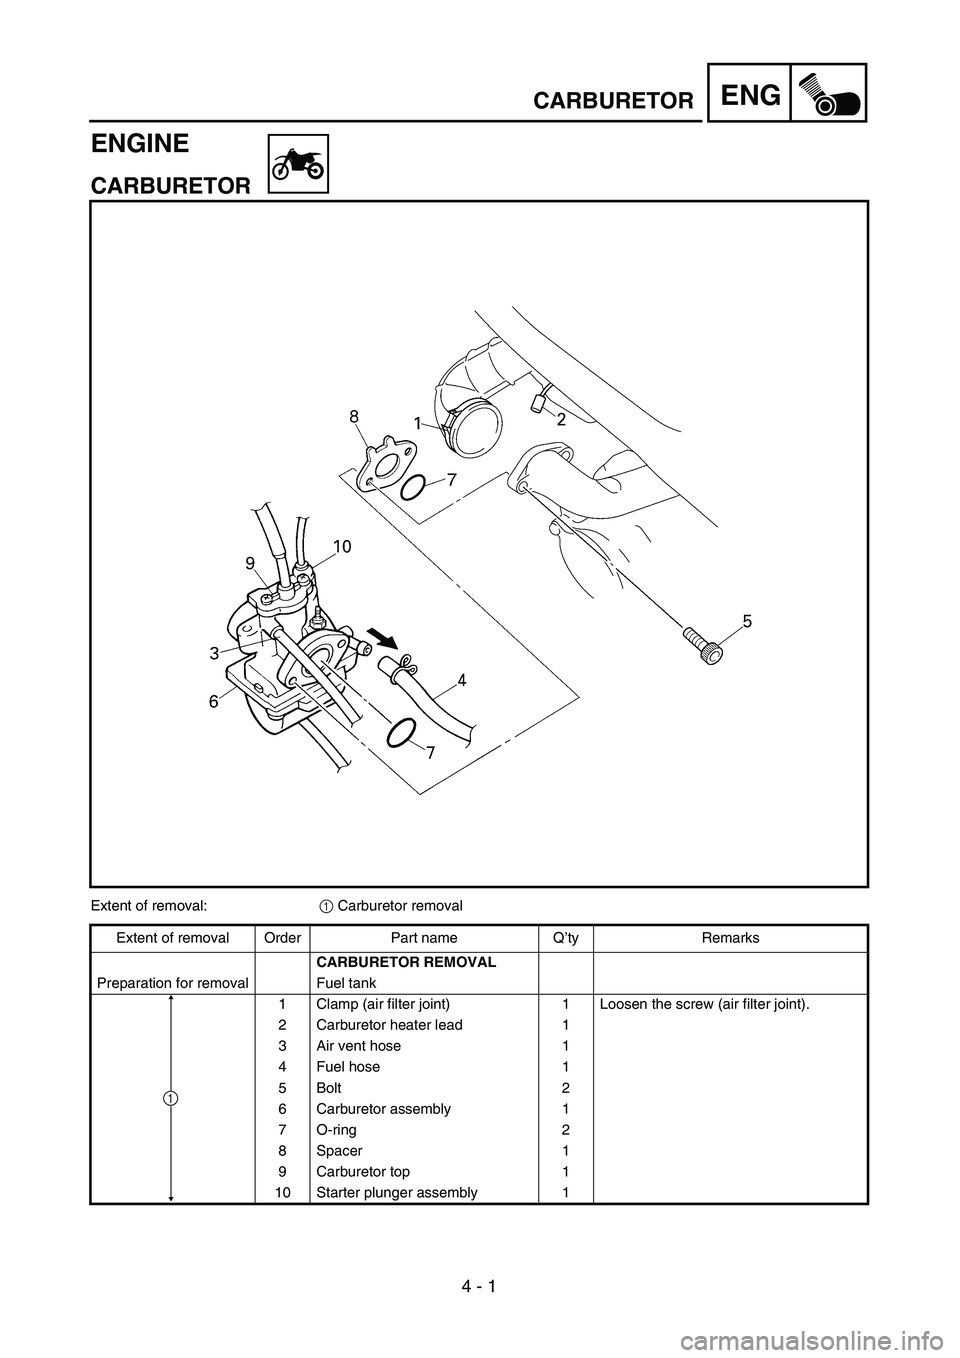 YAMAHA TTR90 2005  Owners Manual  
4 - 1
ENG
 
ENGINE 
CARBURETOR 
Extent of removal:  
1  
 Carburetor removal
Extent of removal Order Part name Q’ty Remarks  
CARBURETOR REMOVAL  
Preparation for removal Fuel tank
1 Clamp (air fi